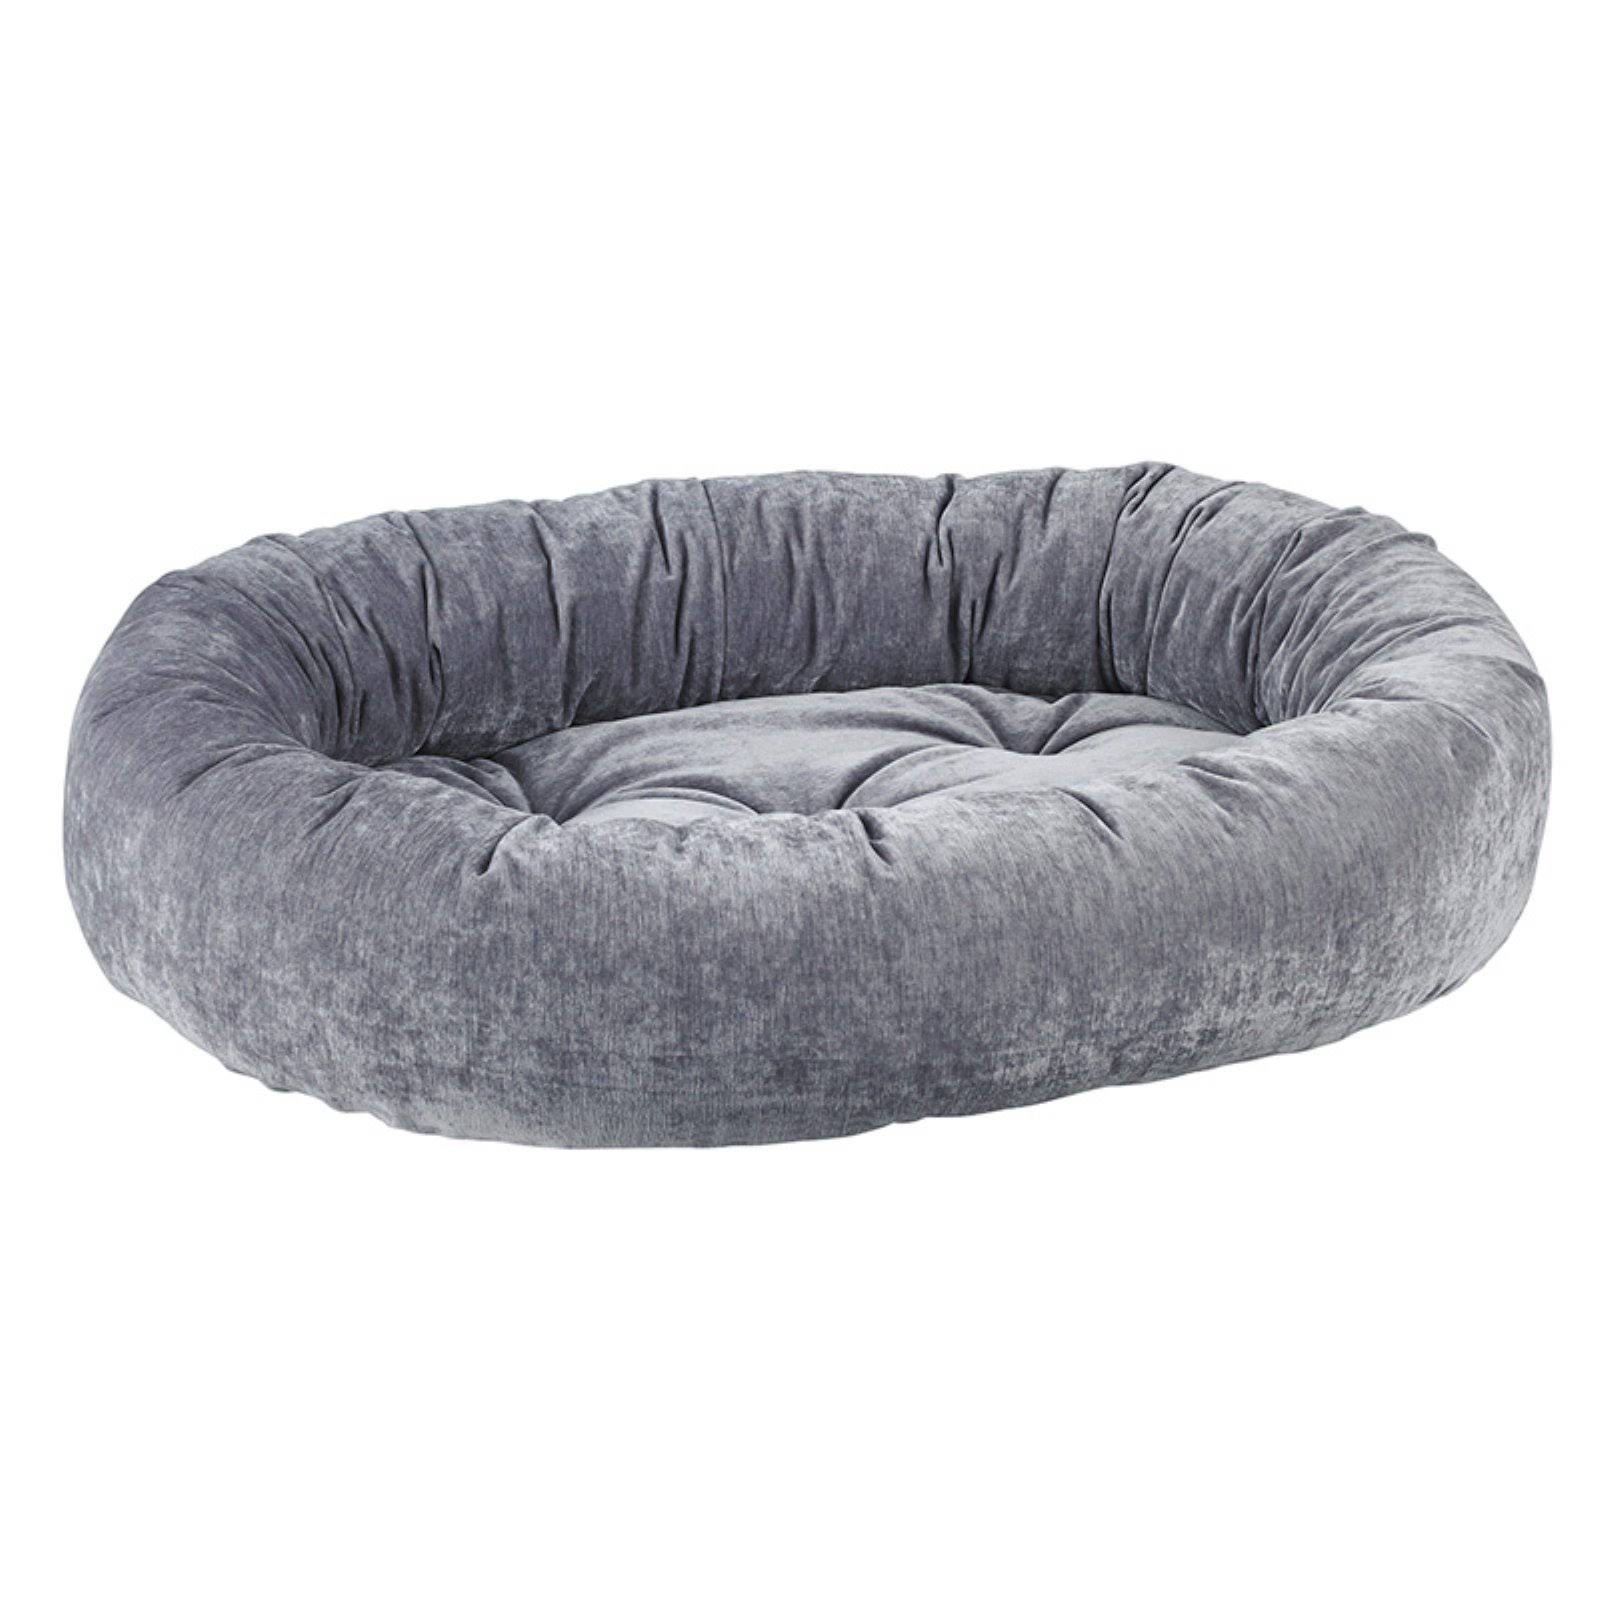 Bowsers Donut Bed - Pumice | Size: Small